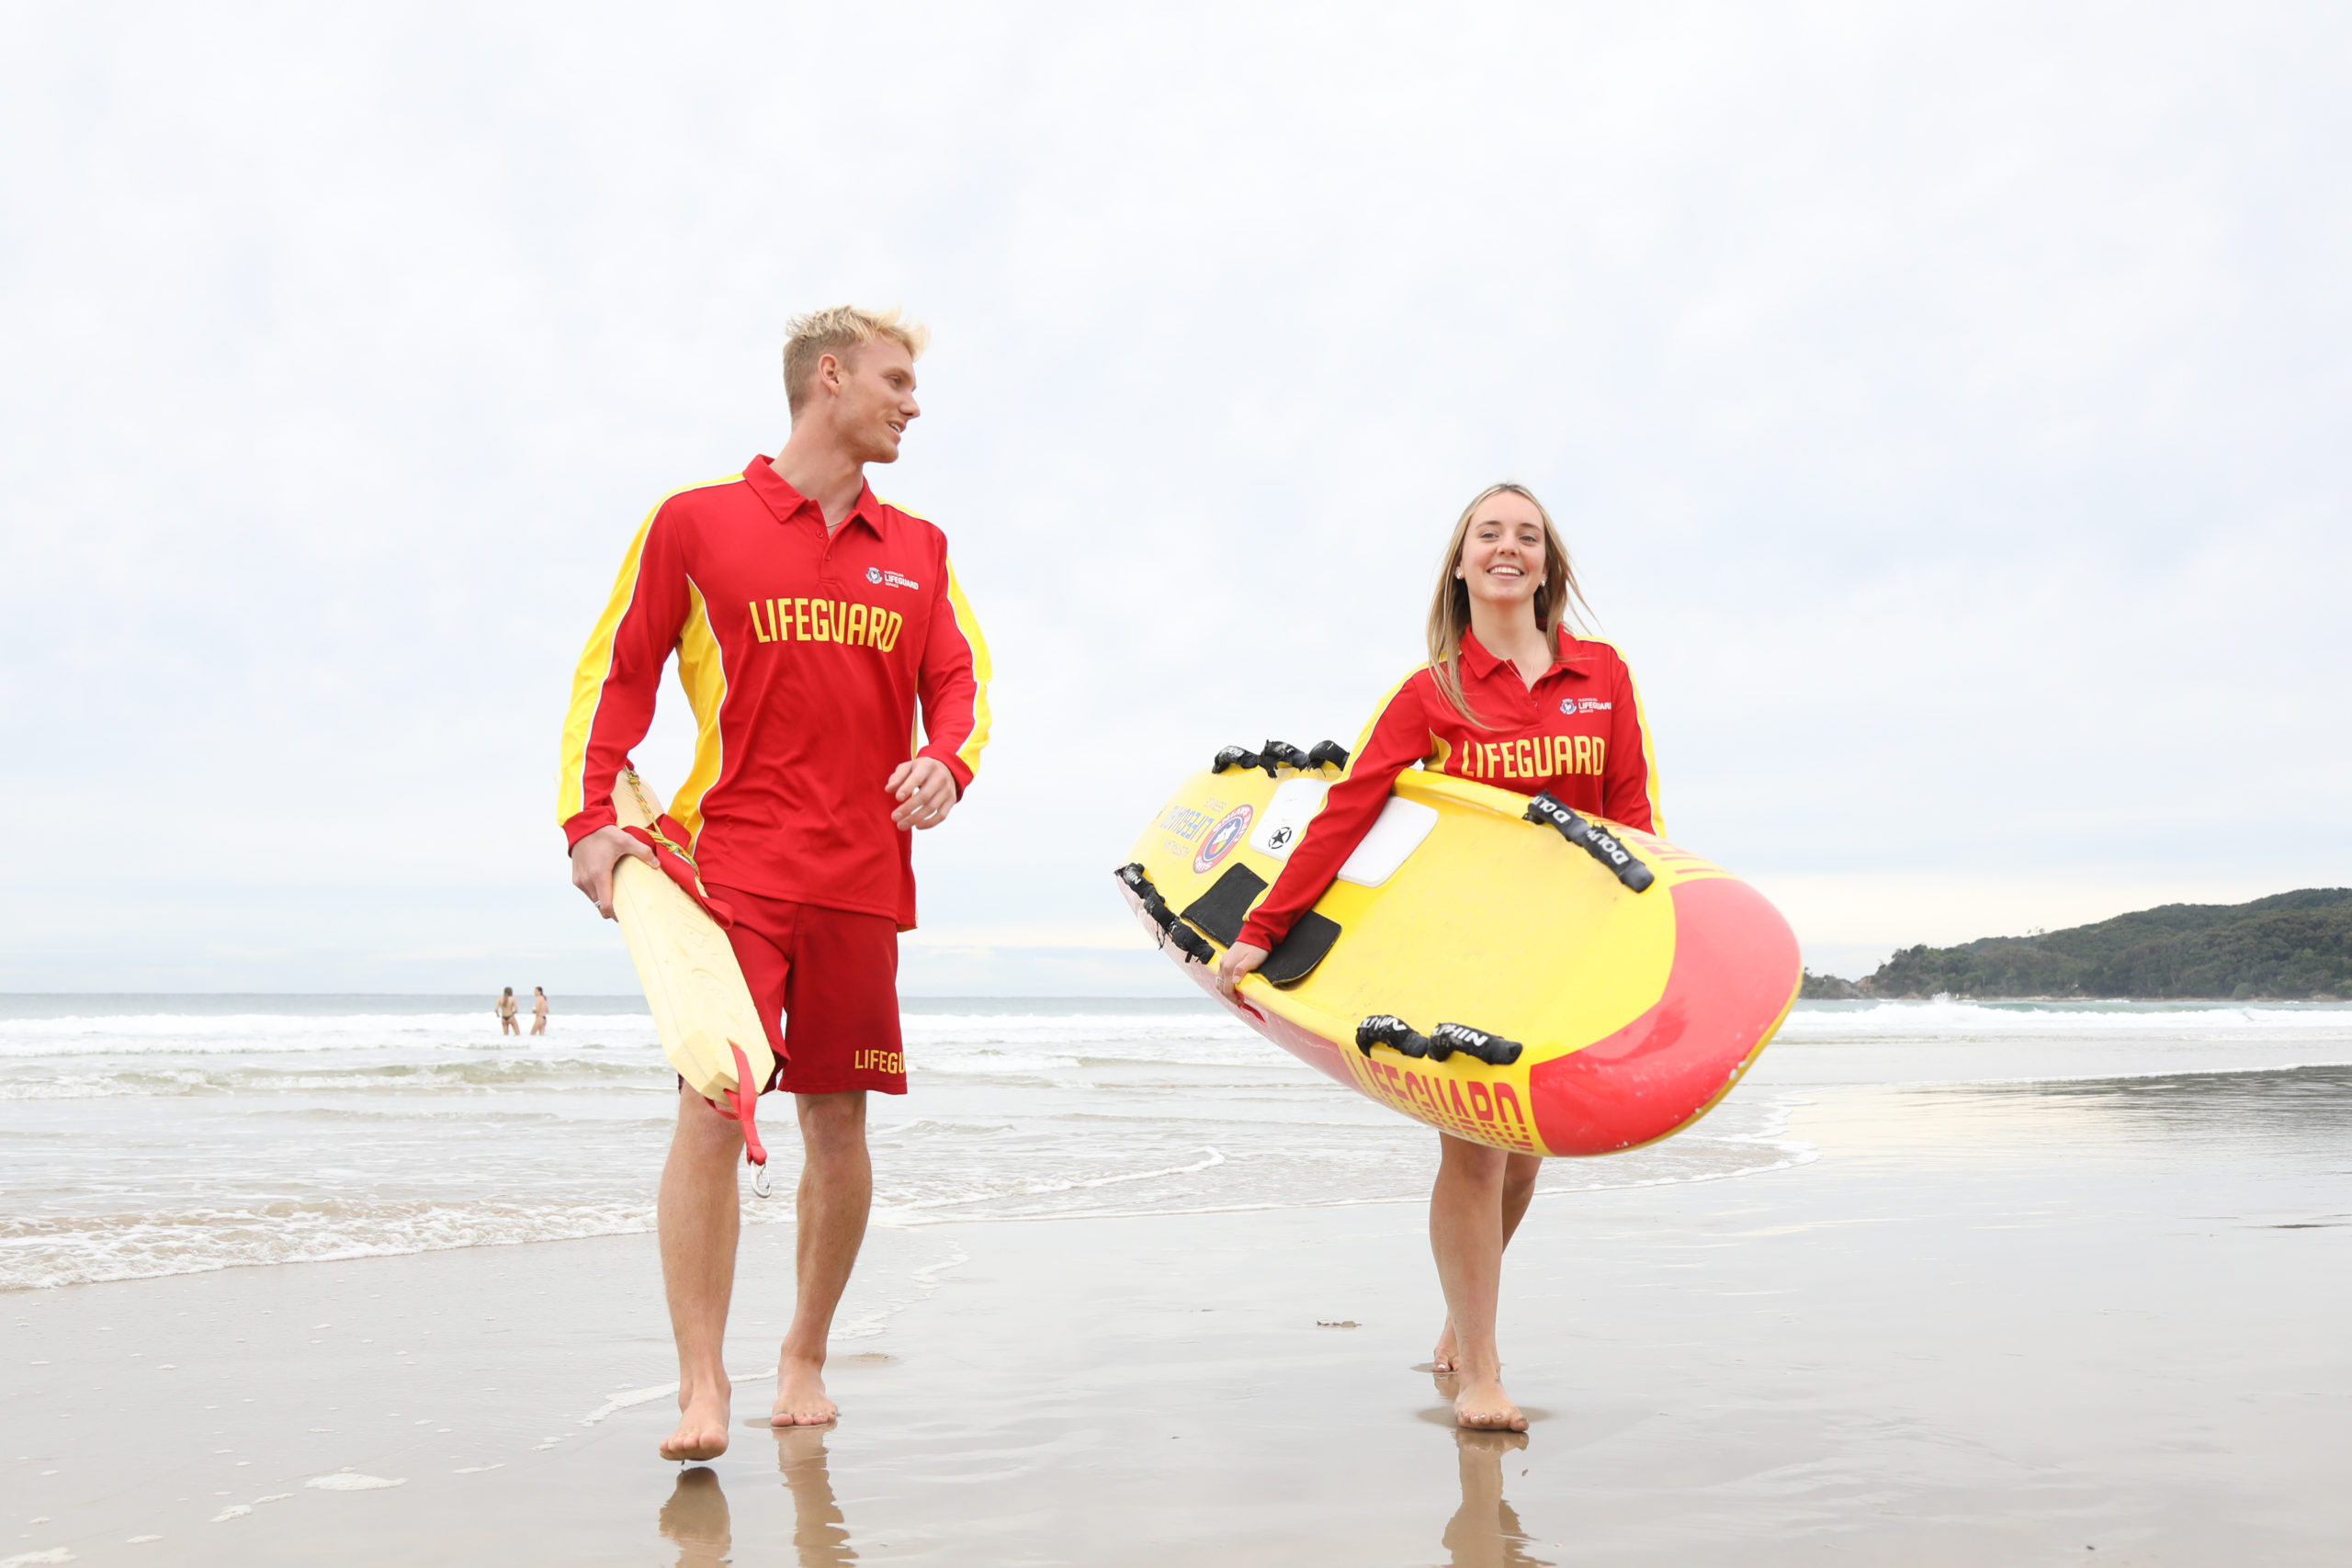 Lifeguards Double Up in State Rescue Award